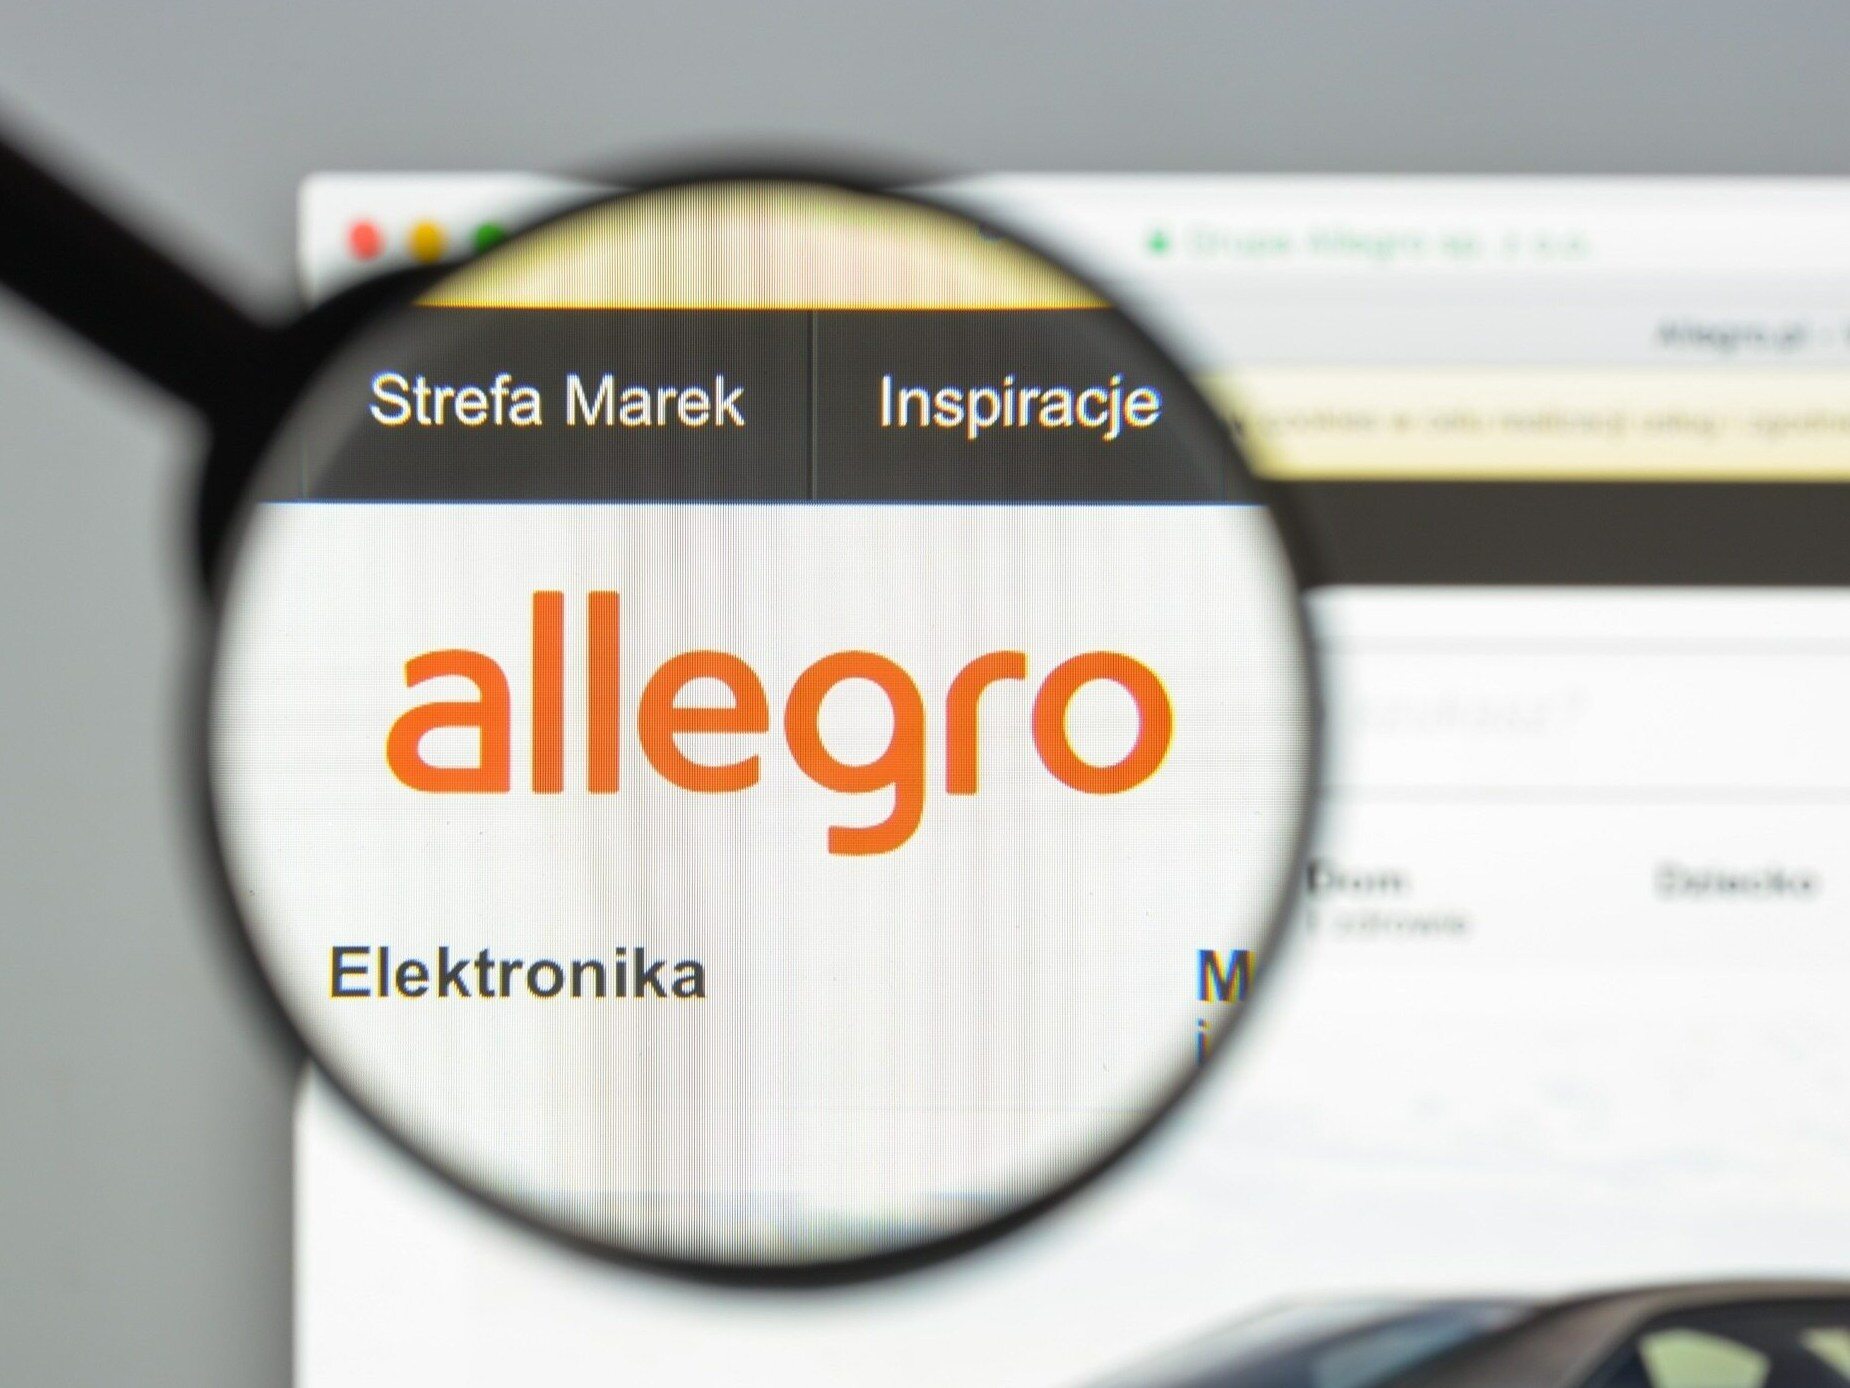 Allegro will distribute shares to employees.  This is an element of motivational activities